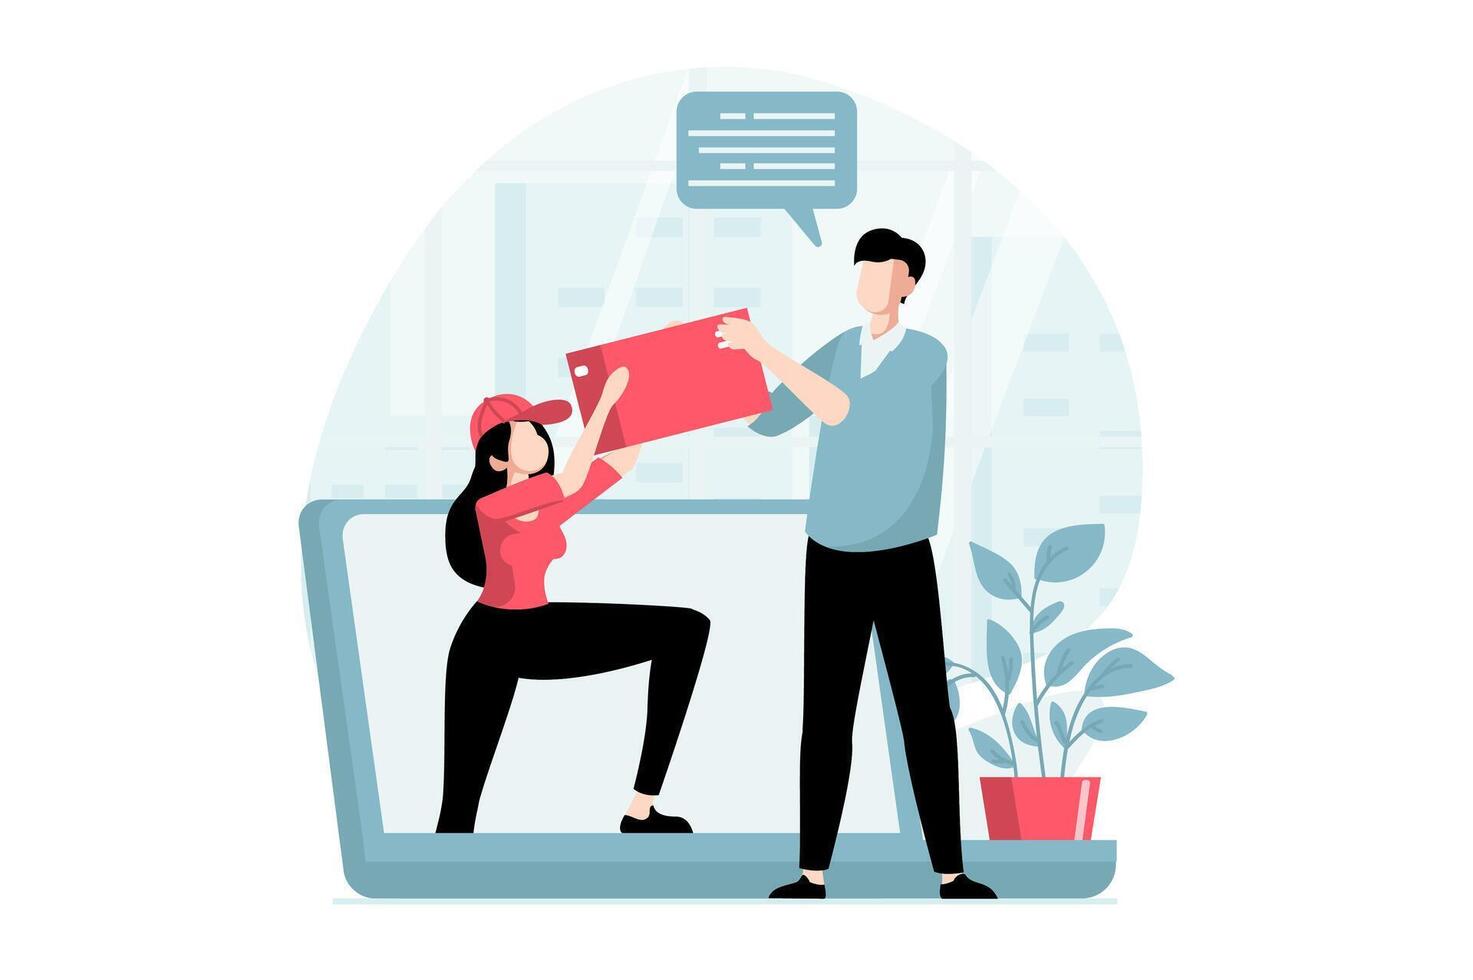 Delivery service concept with people scene in flat design. Woman courier delivering box to client. Man ordering goods online and receiving parcel. illustration with character situation for web vector